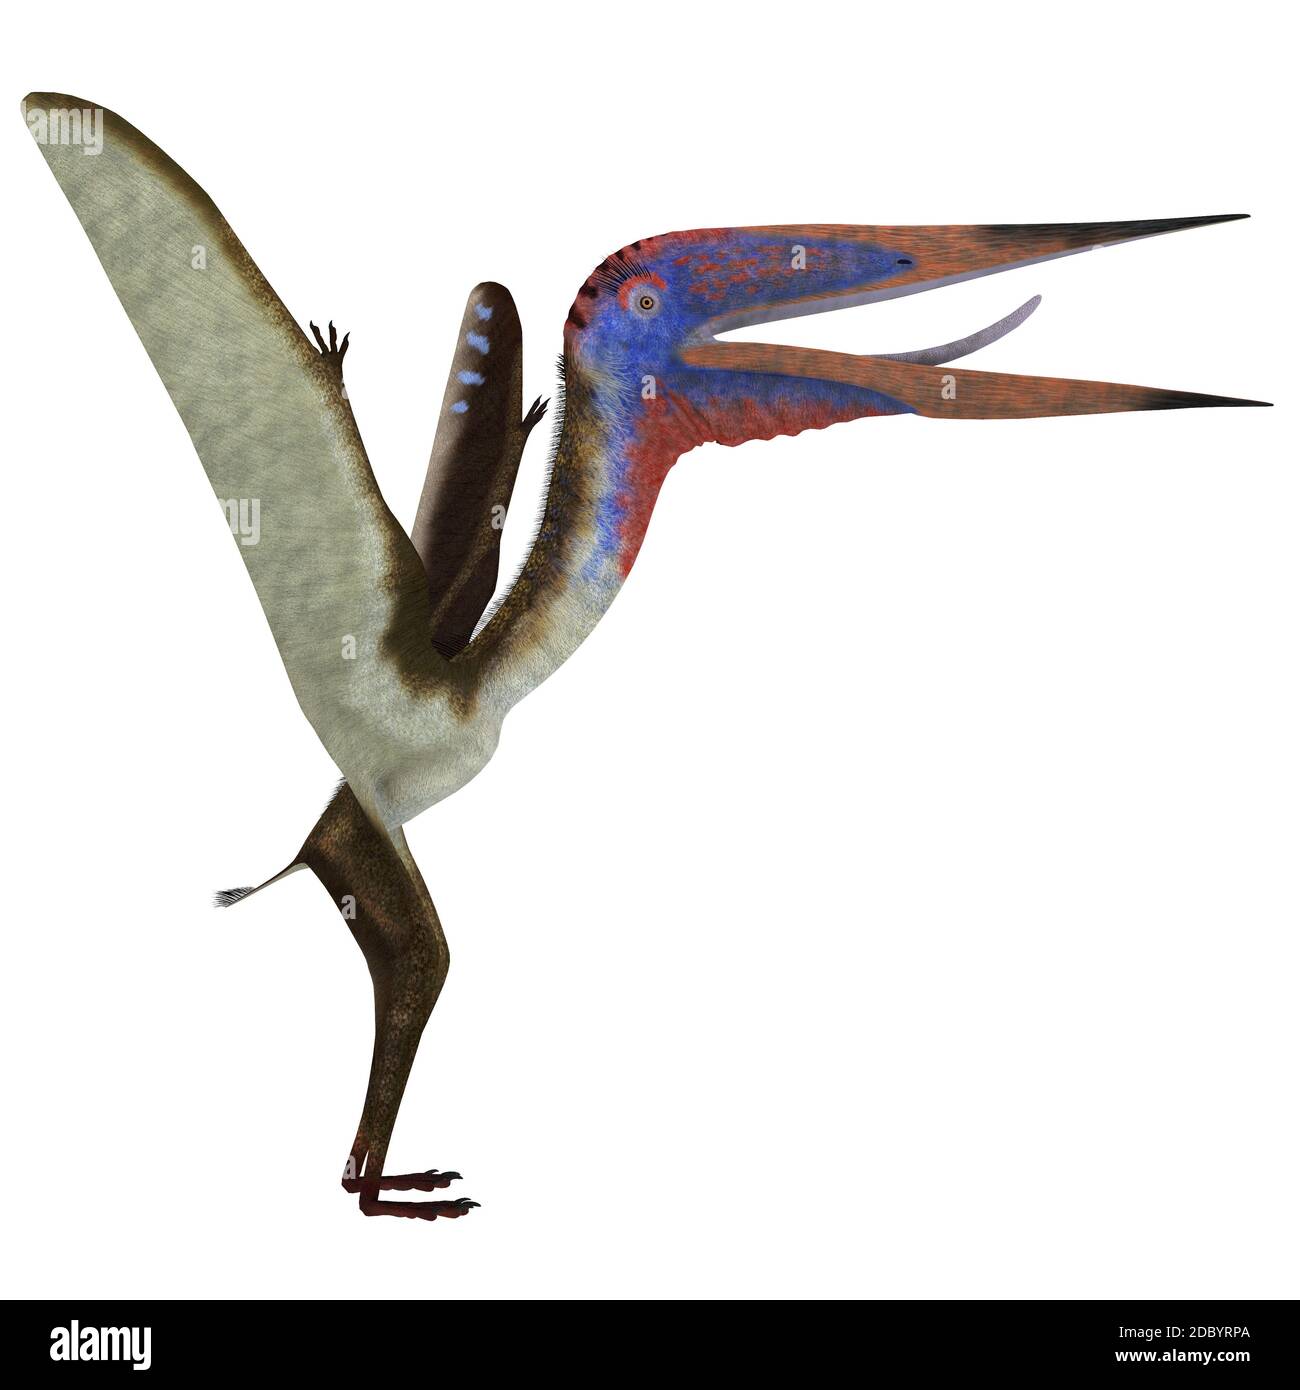 Pterosaur Reptiles - A Collection Of Various Pterosaur Reptiles From  Different Prehistoric Periods Of Earth's History. Stock Photo, Picture and  Royalty Free Image. Image 76049558.